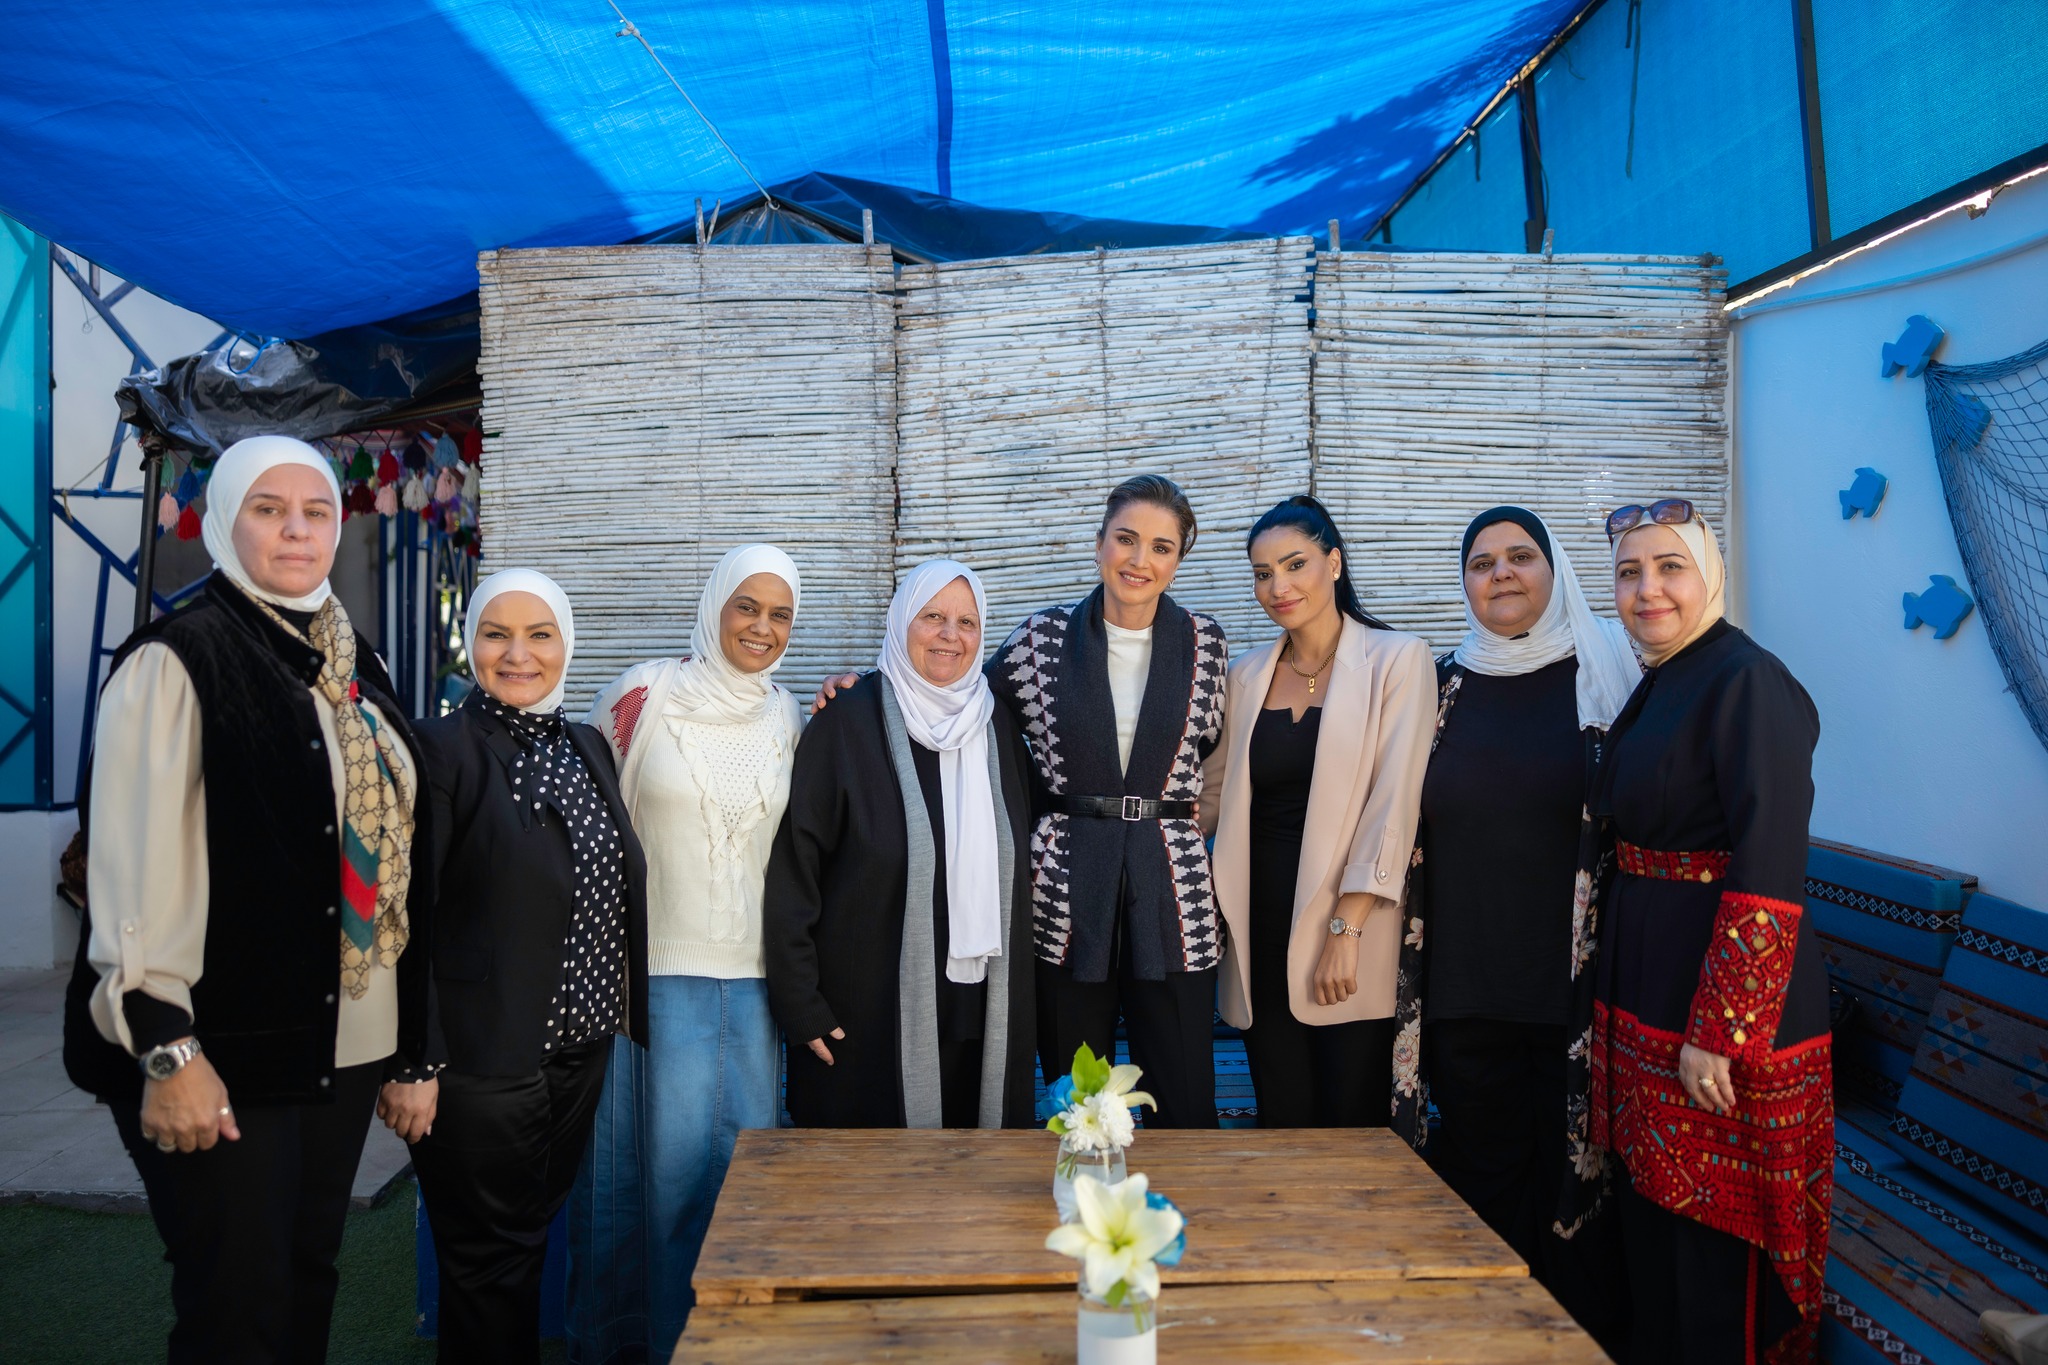 Queen Rania of Jordan travelled to Aqaba to visit the House of Roses Ladies Association where she met with group of local women artisans